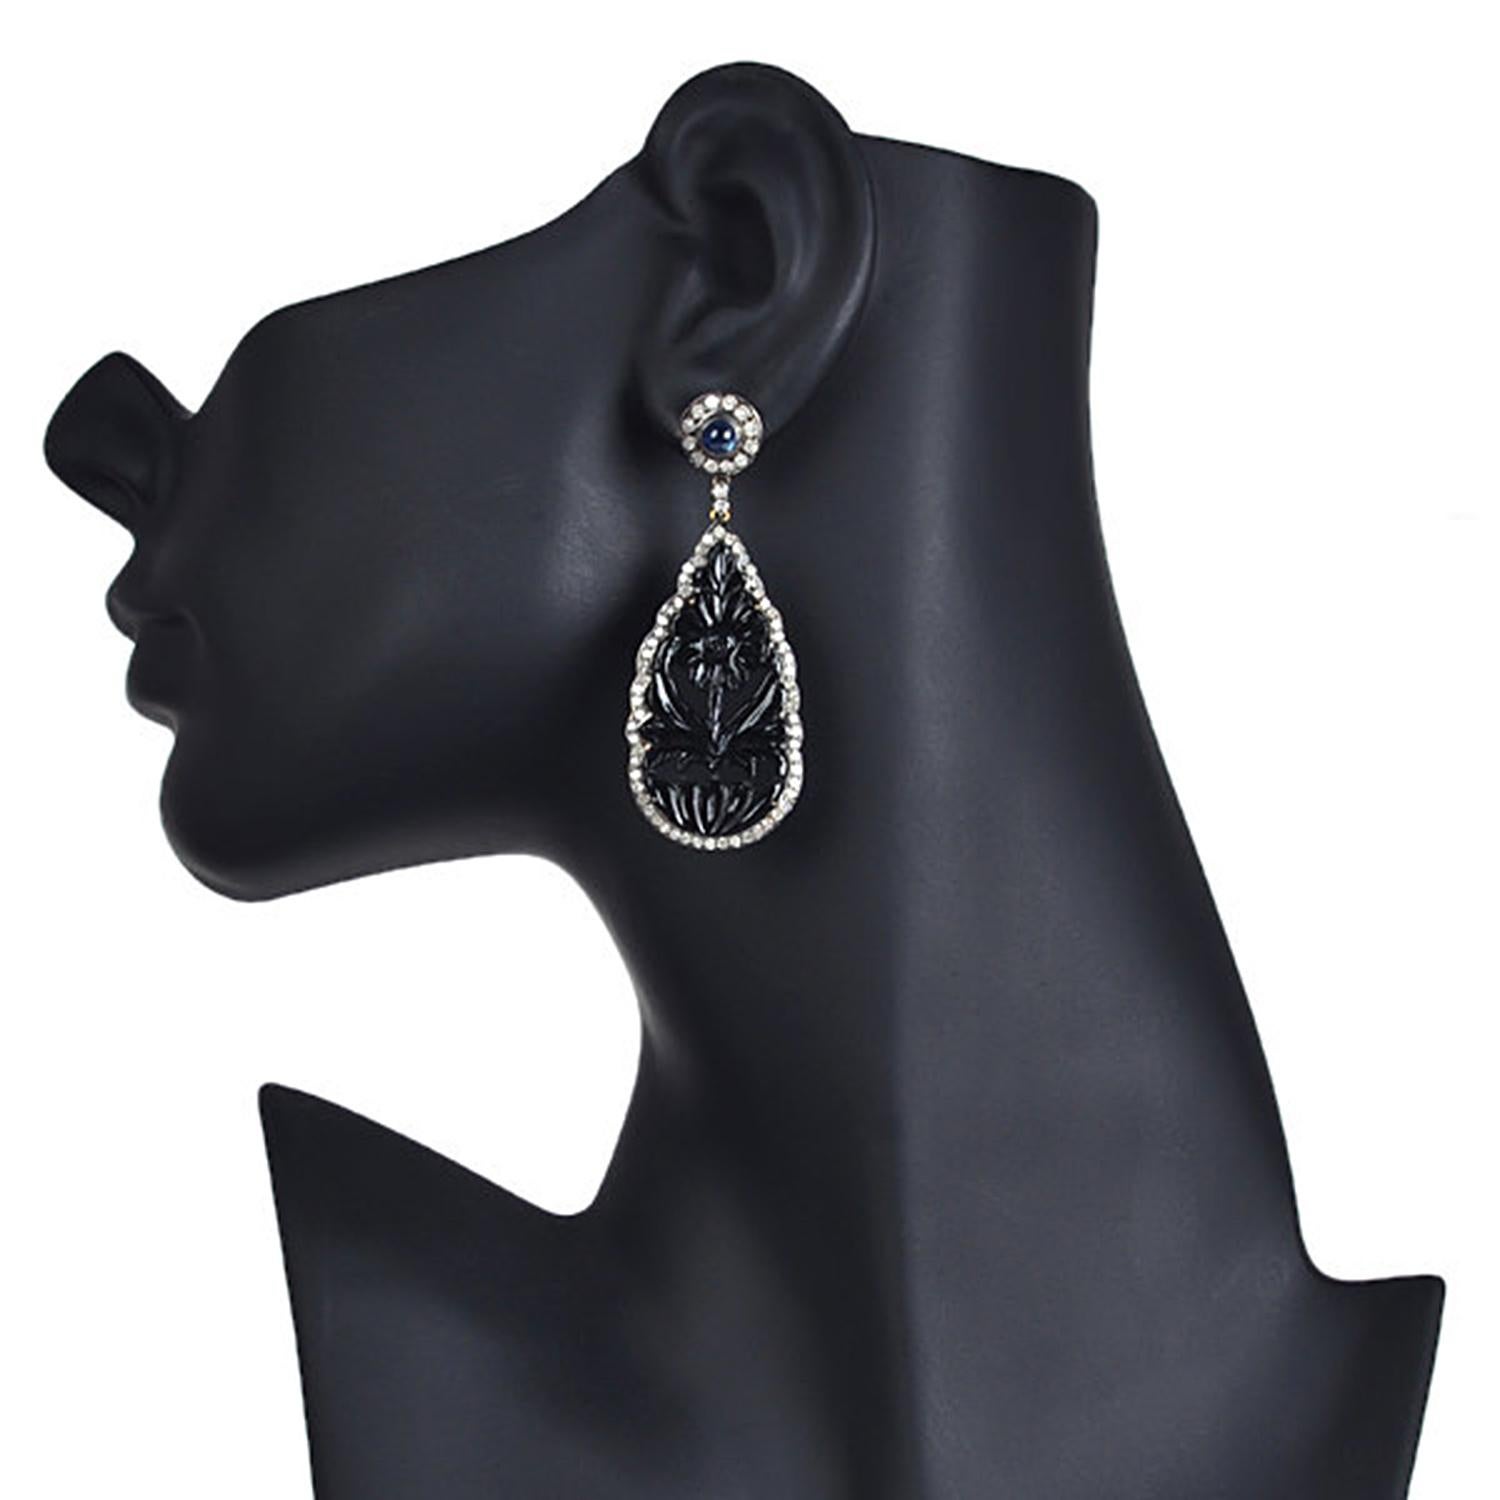 Designer Carved Onyx Drop Earring in silver and gold with blue sapphire is an evergreen piece.

18kt gold: 1.68gms
Diamond: 2.69cts
Onyx Black: 27.22cts
Sapphire:1 .3cts
